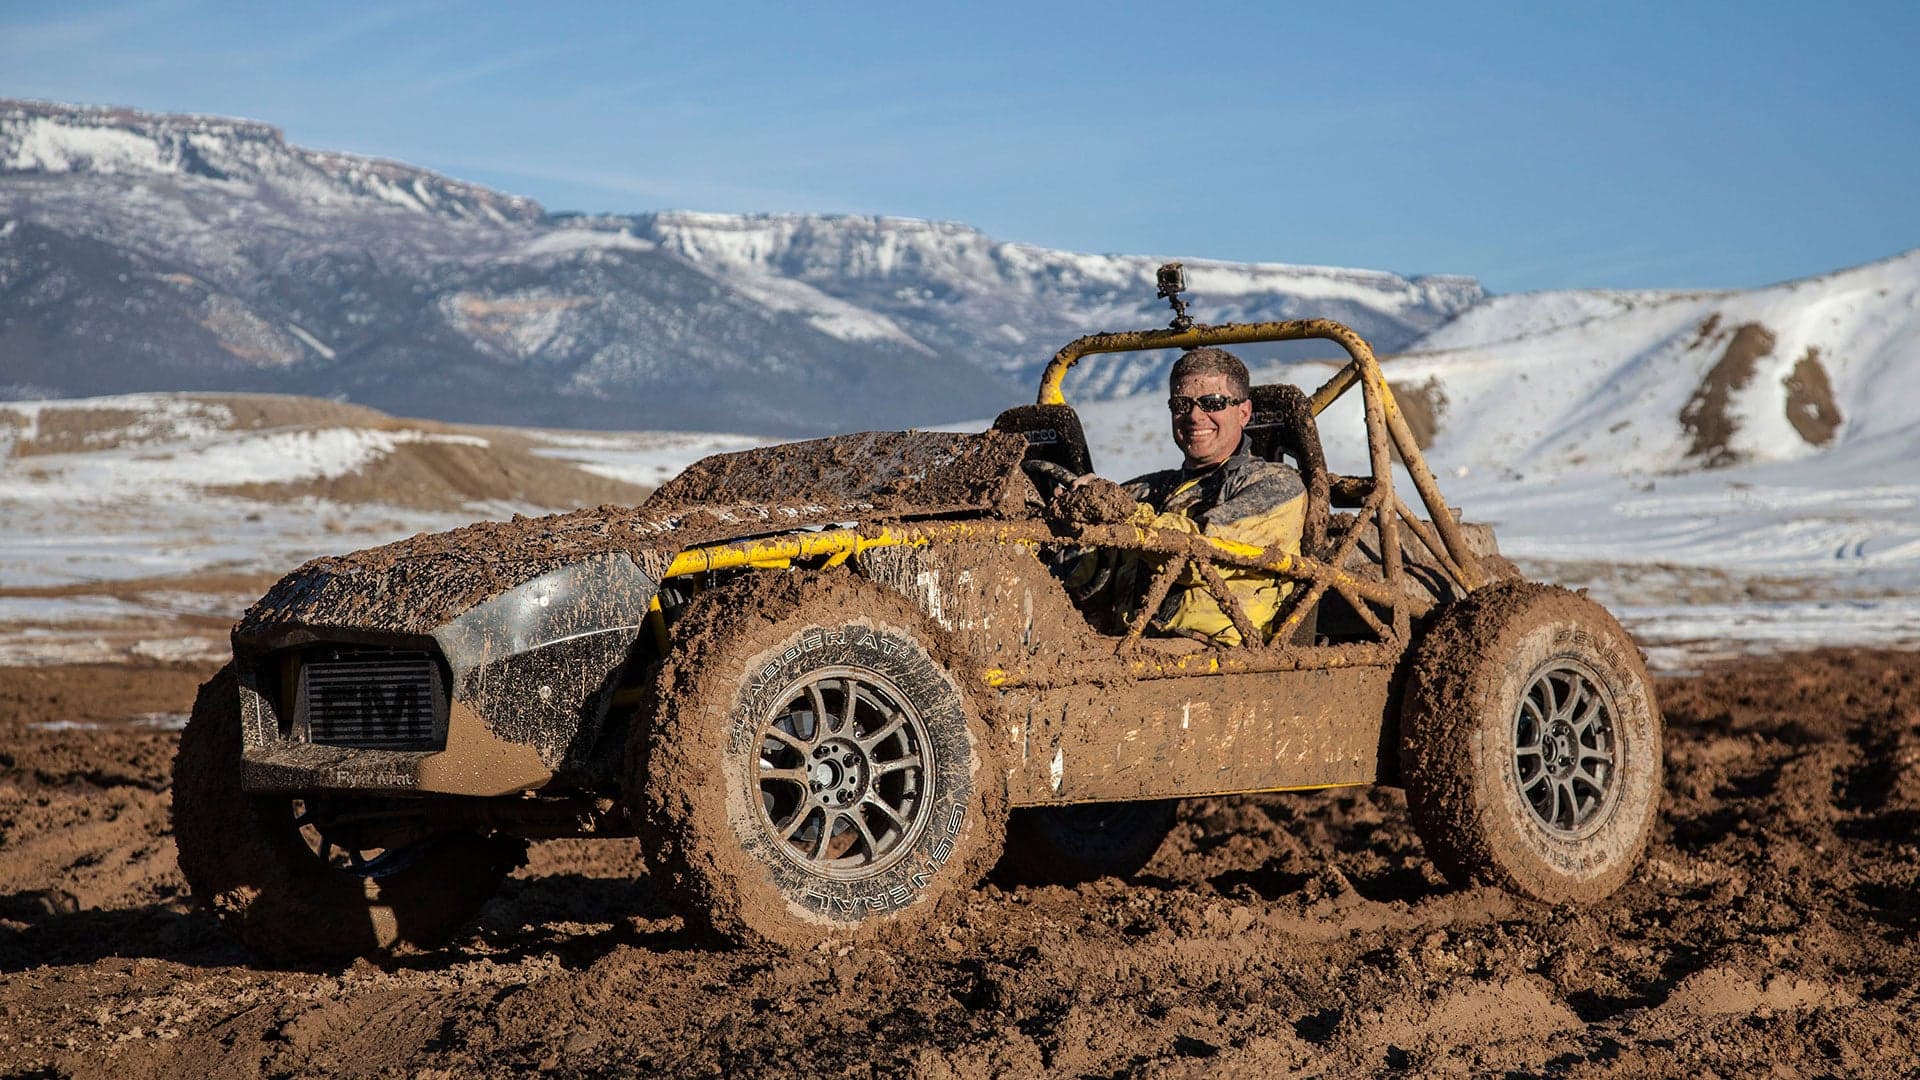 Slinging Mud in the Lifted, Turbo Miata of Your Dreams